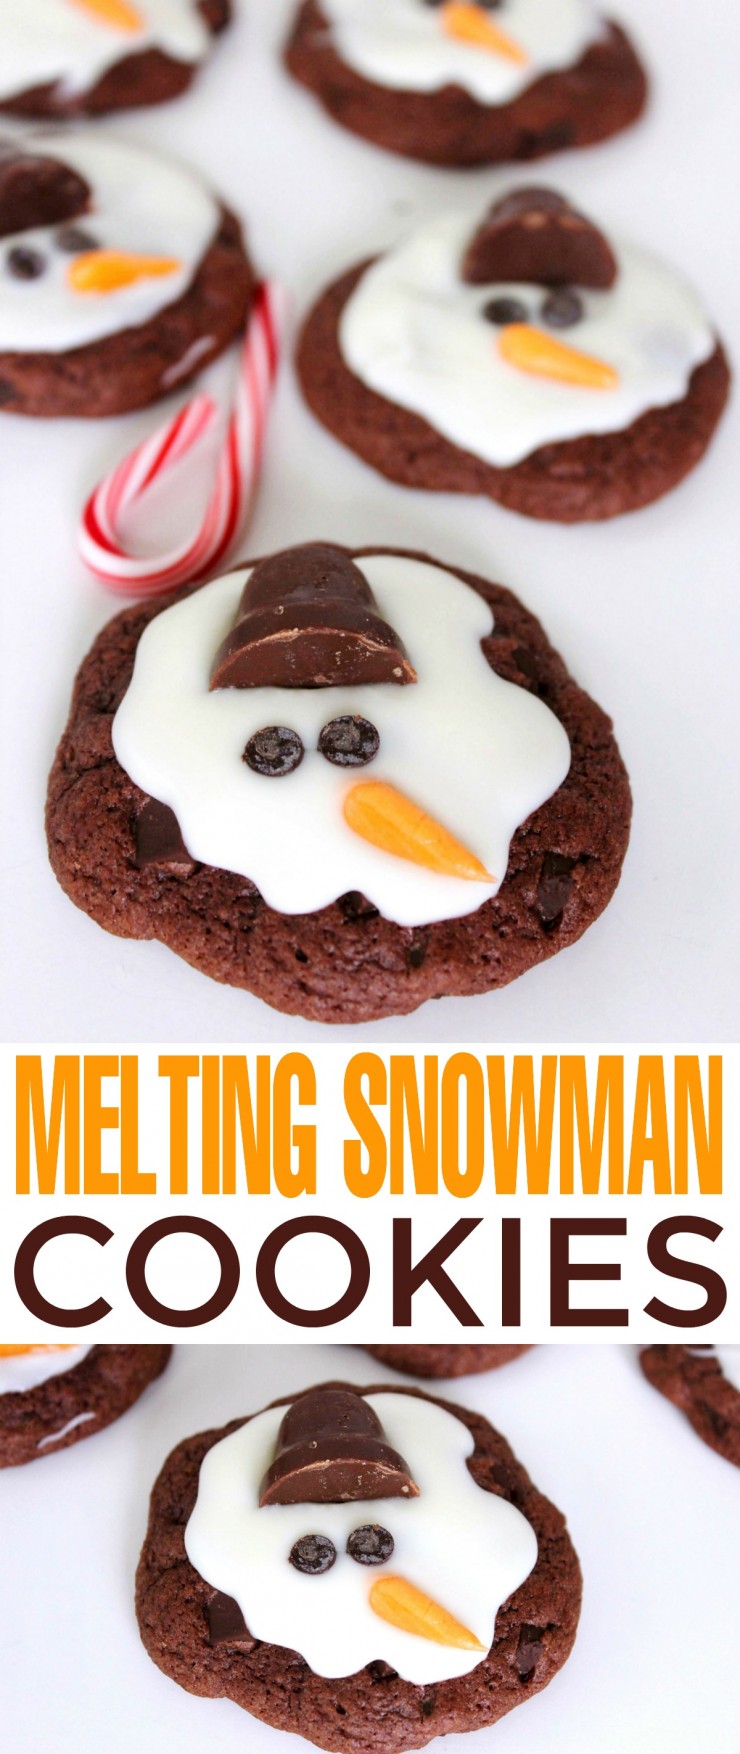 The Melting Snowman Cookies are a sweet holiday treat perfect for holiday parties with kids!